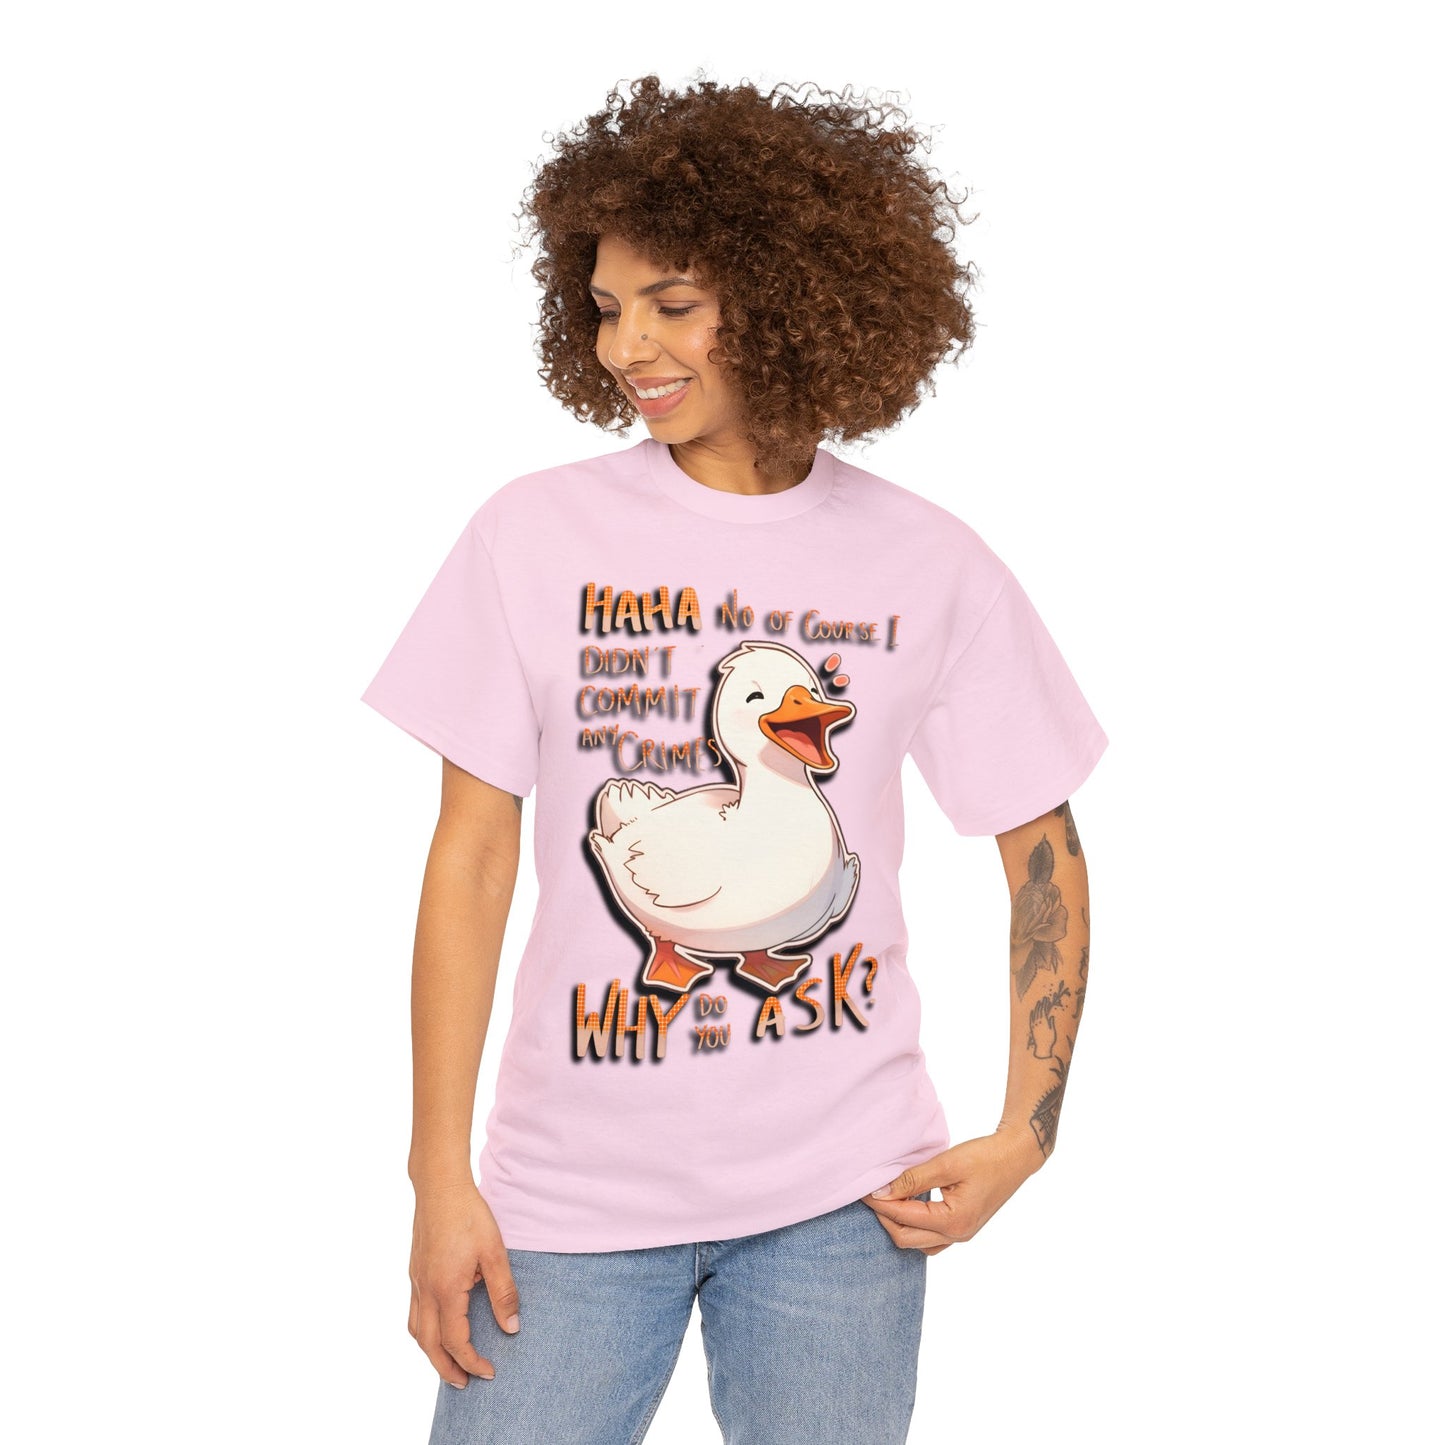 Haha No Of Course I Didn't Commit Any Crimes Why Do You Ask Nervous Duck Unisex Cotton Tee